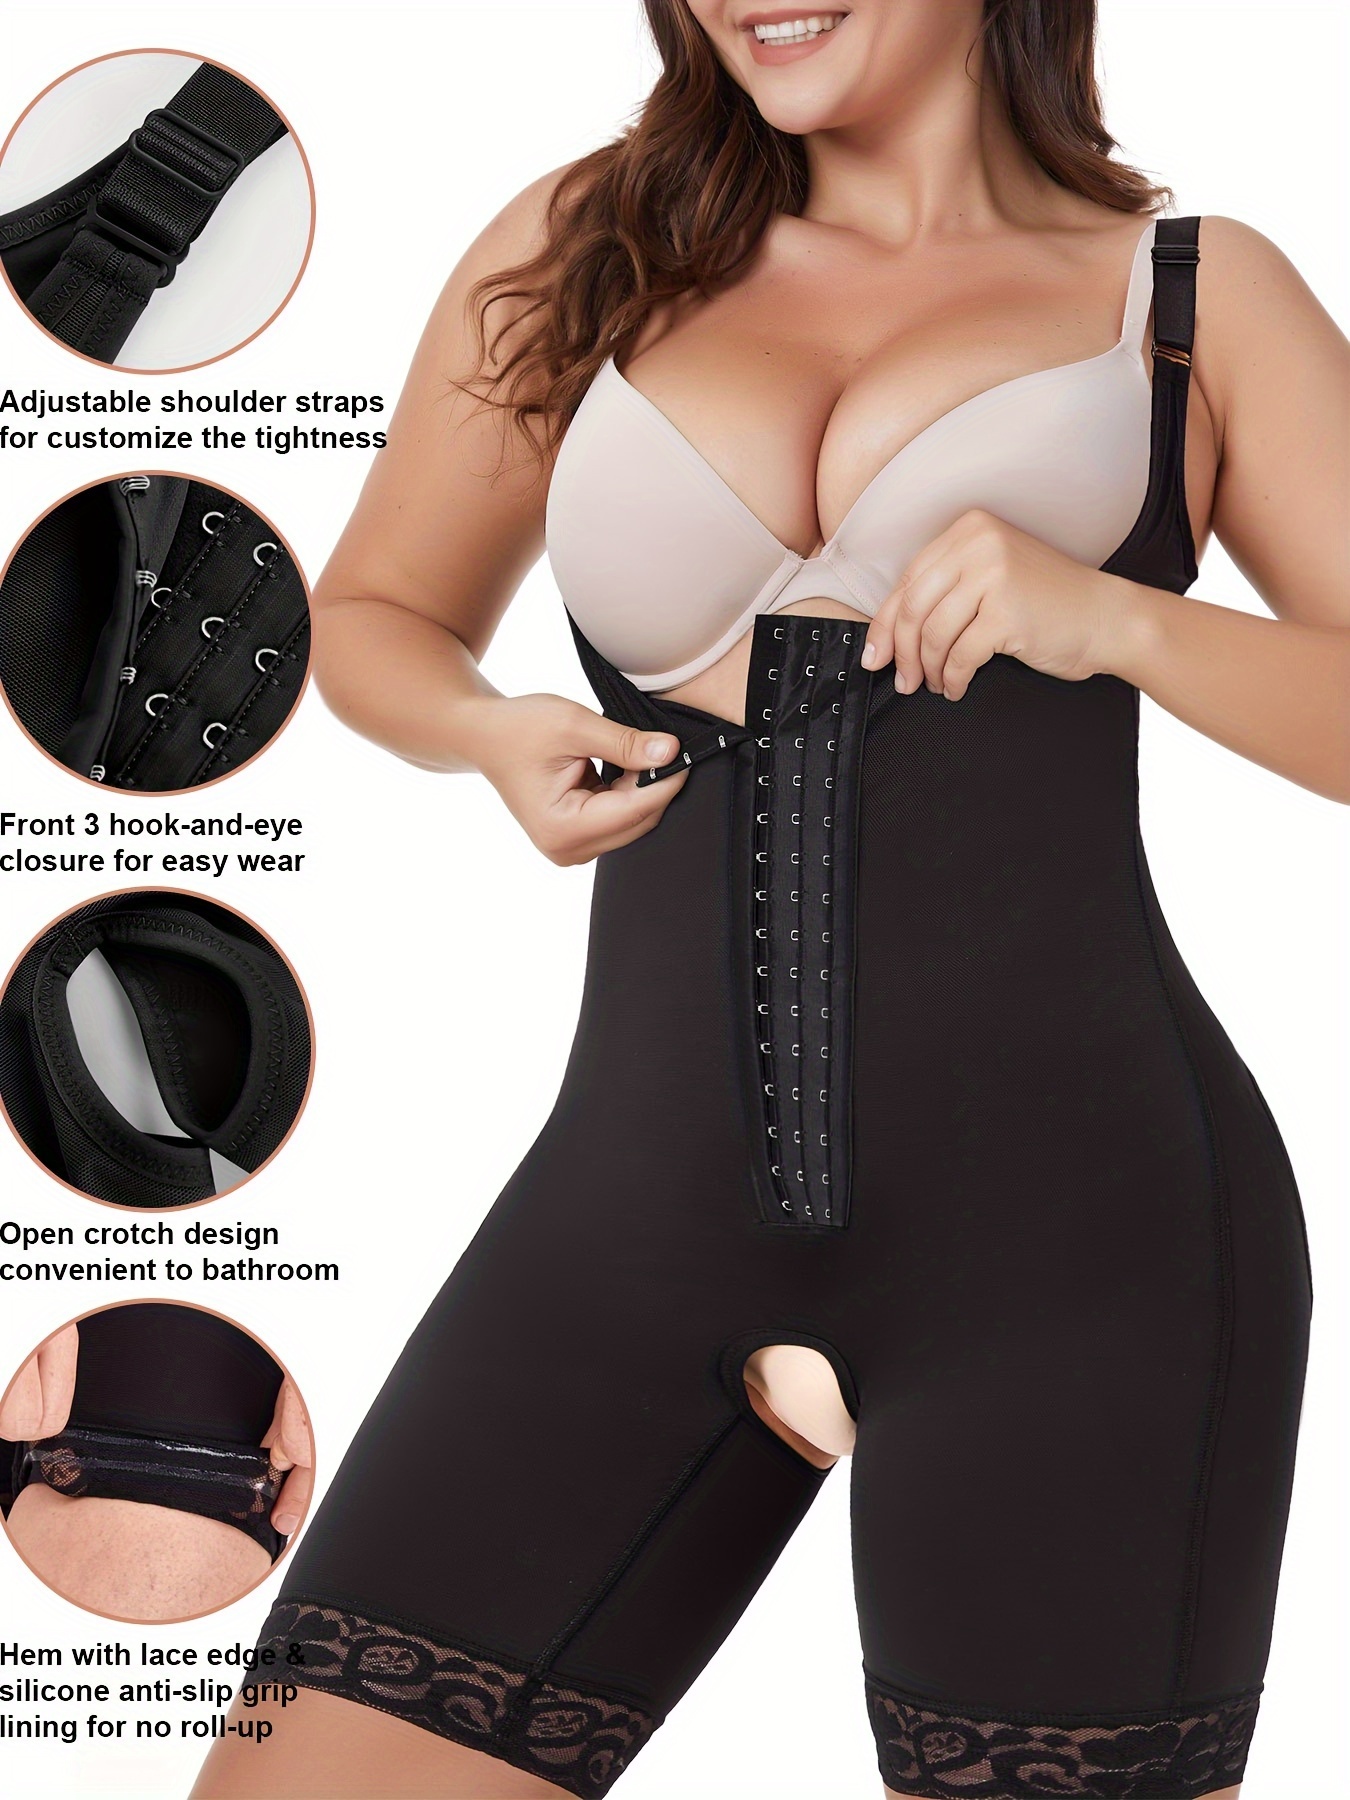 Women's Sexy Shapewear Bodysuit, Plus Size Lace Trim Tummy Control Butt  Lifting Open Crotch Adjustable Body Shaper, Free Shipping For New Users